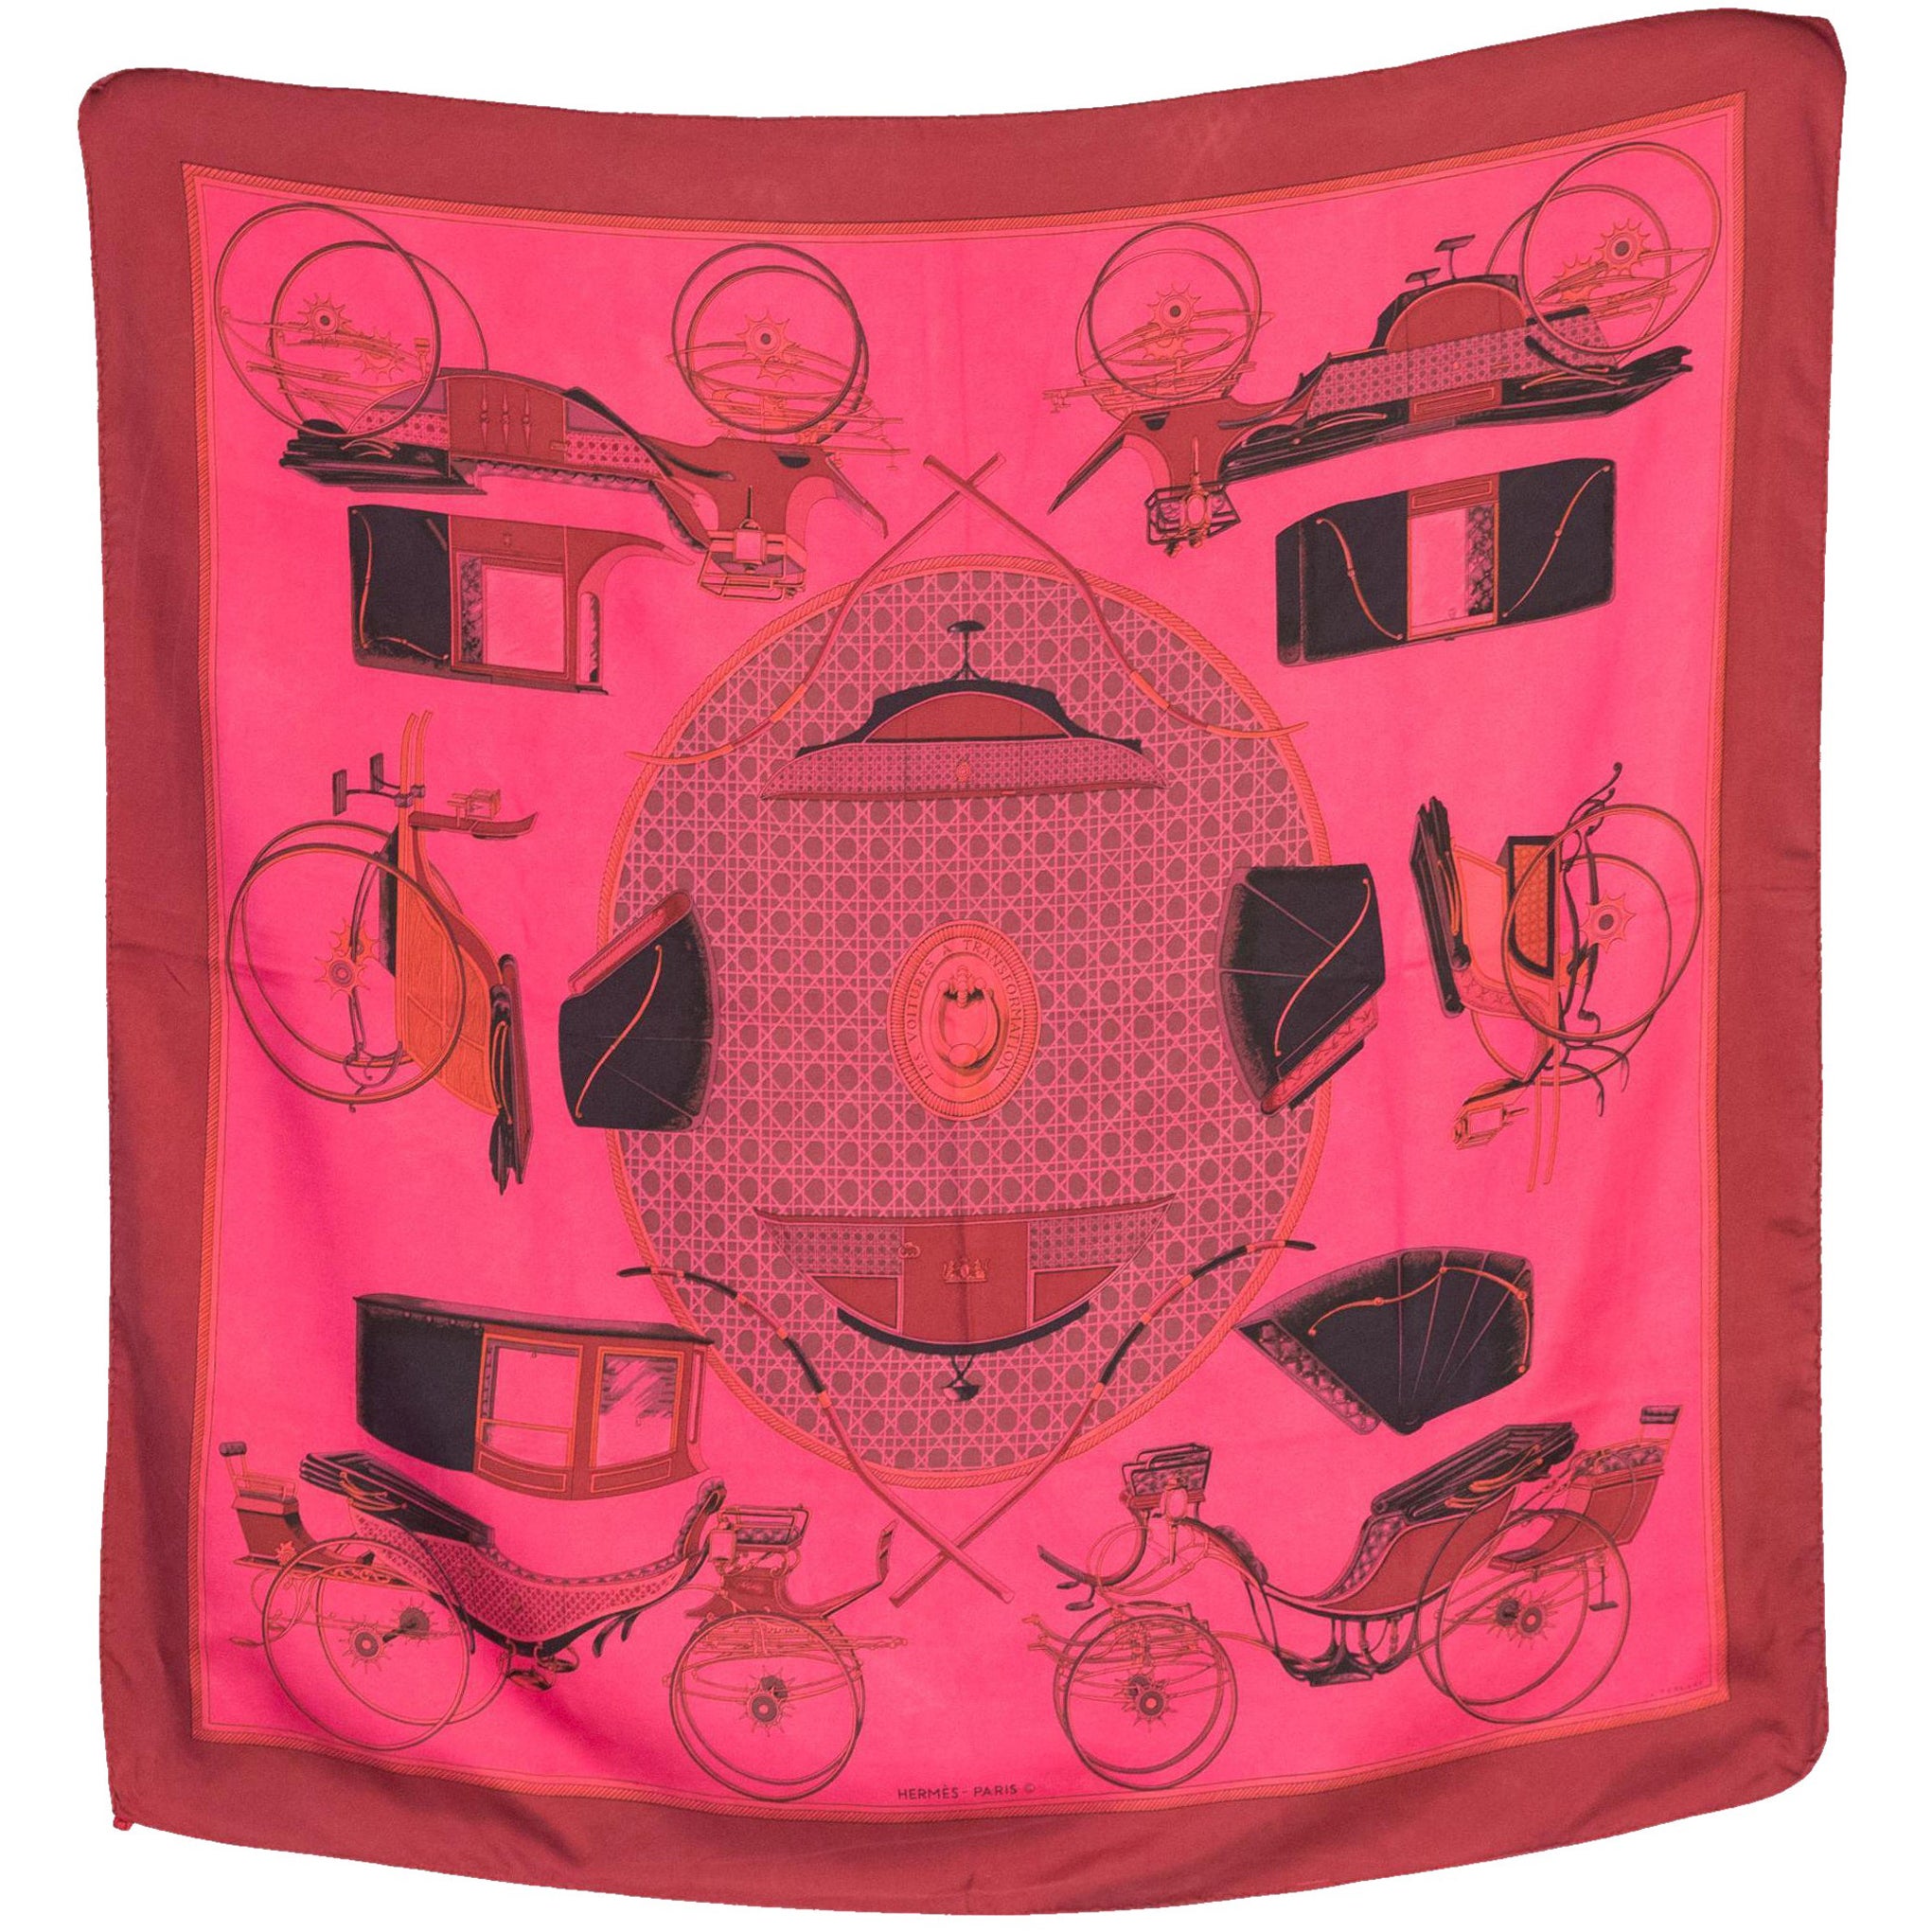 Hermes Voitures a Transformations by F. de la Perriere Silk Scarf